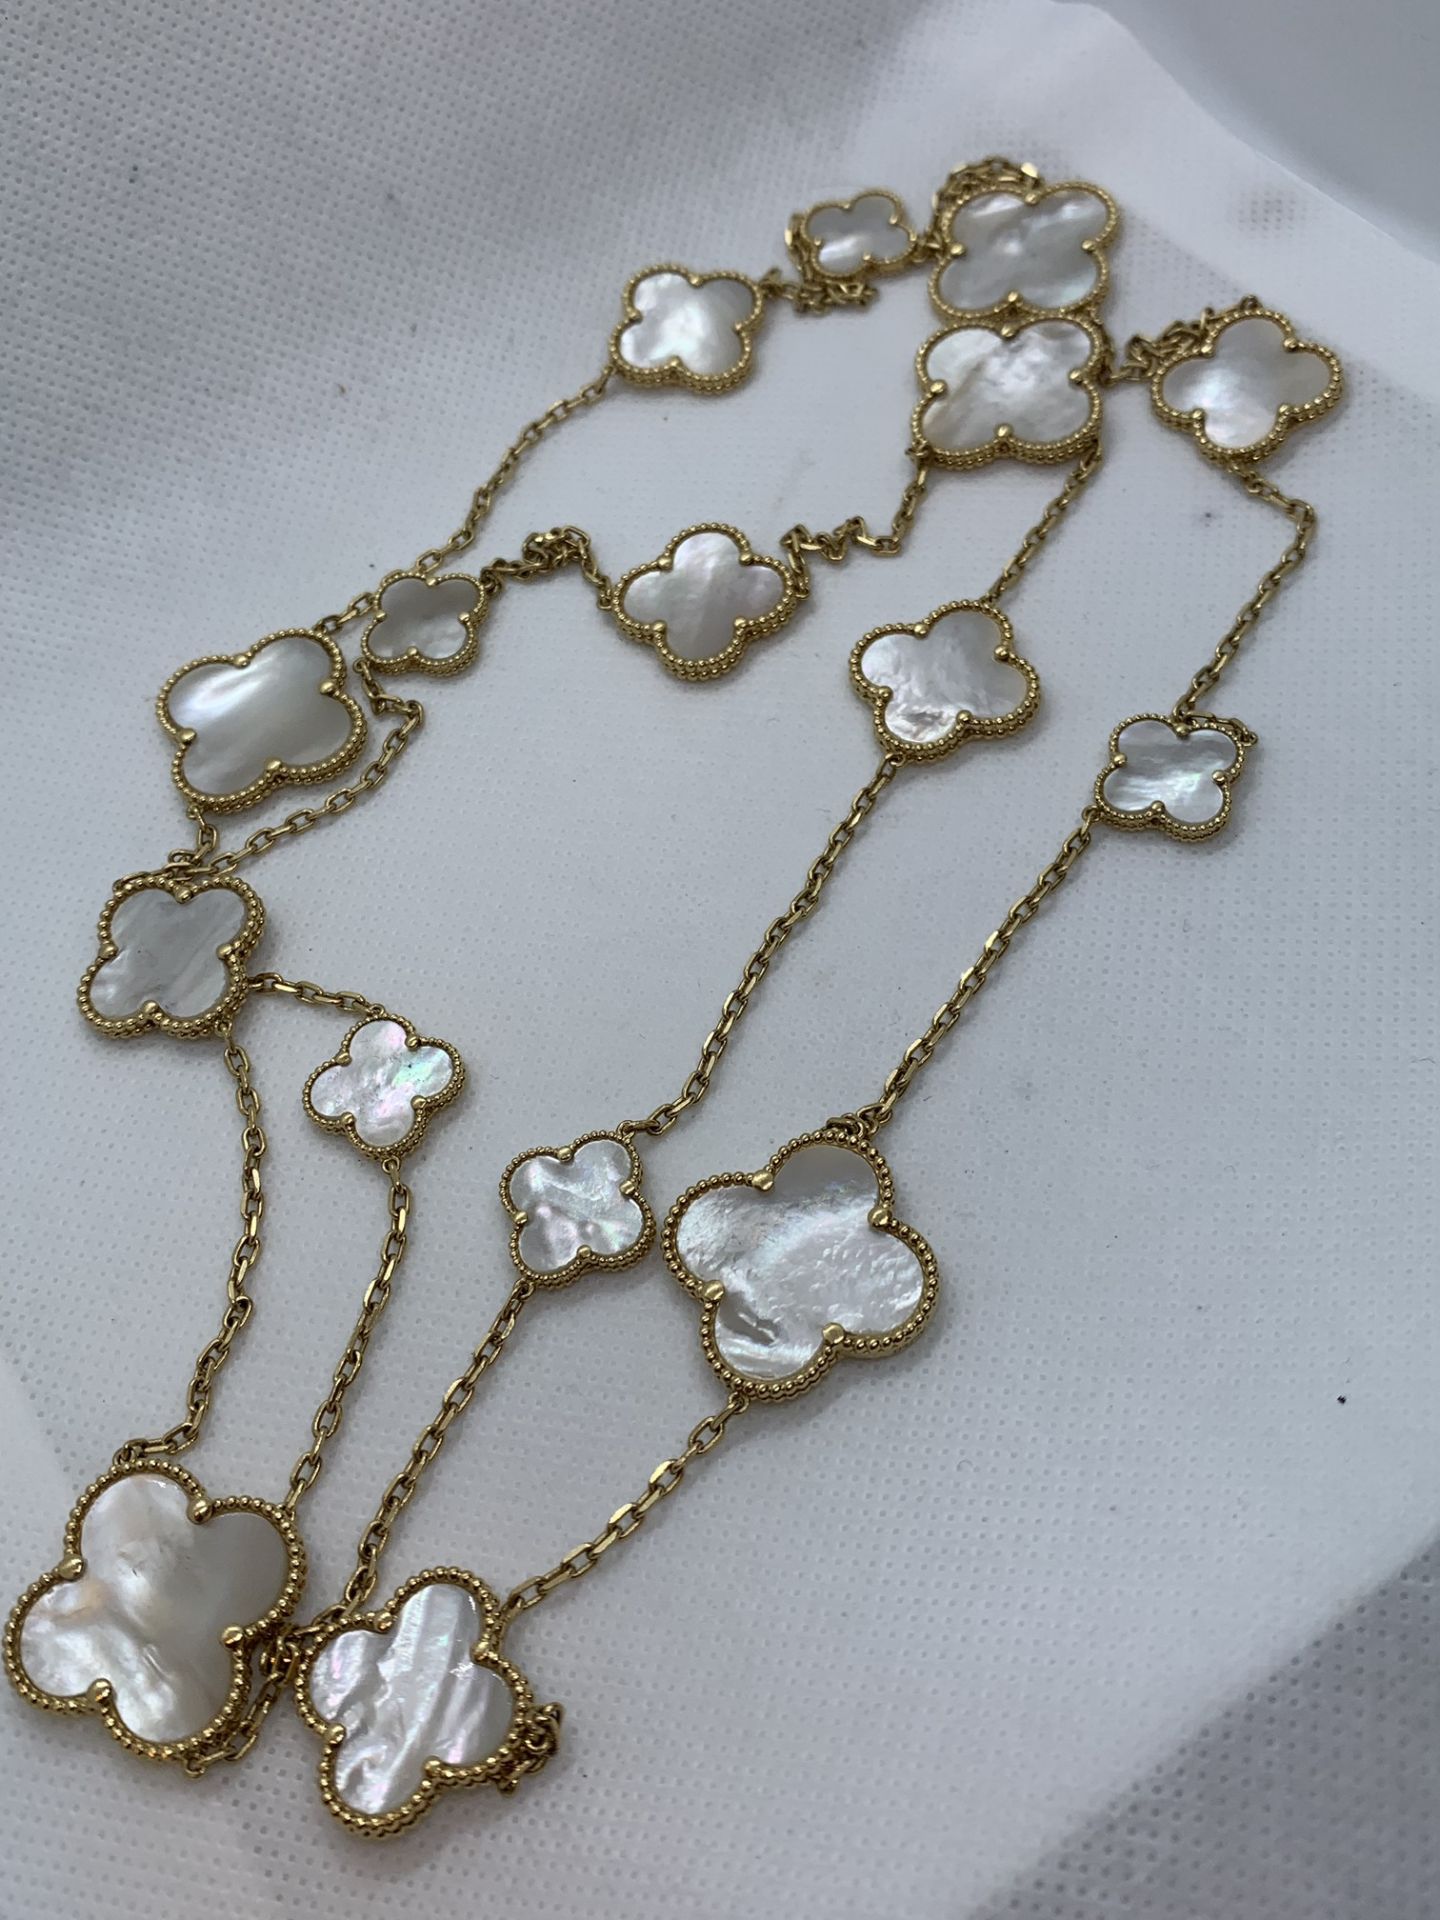 18ct GOLD MOTHER OF PEARL NECKLACE APPROX 40" - VAN CLEEF STYLE - Image 5 of 6